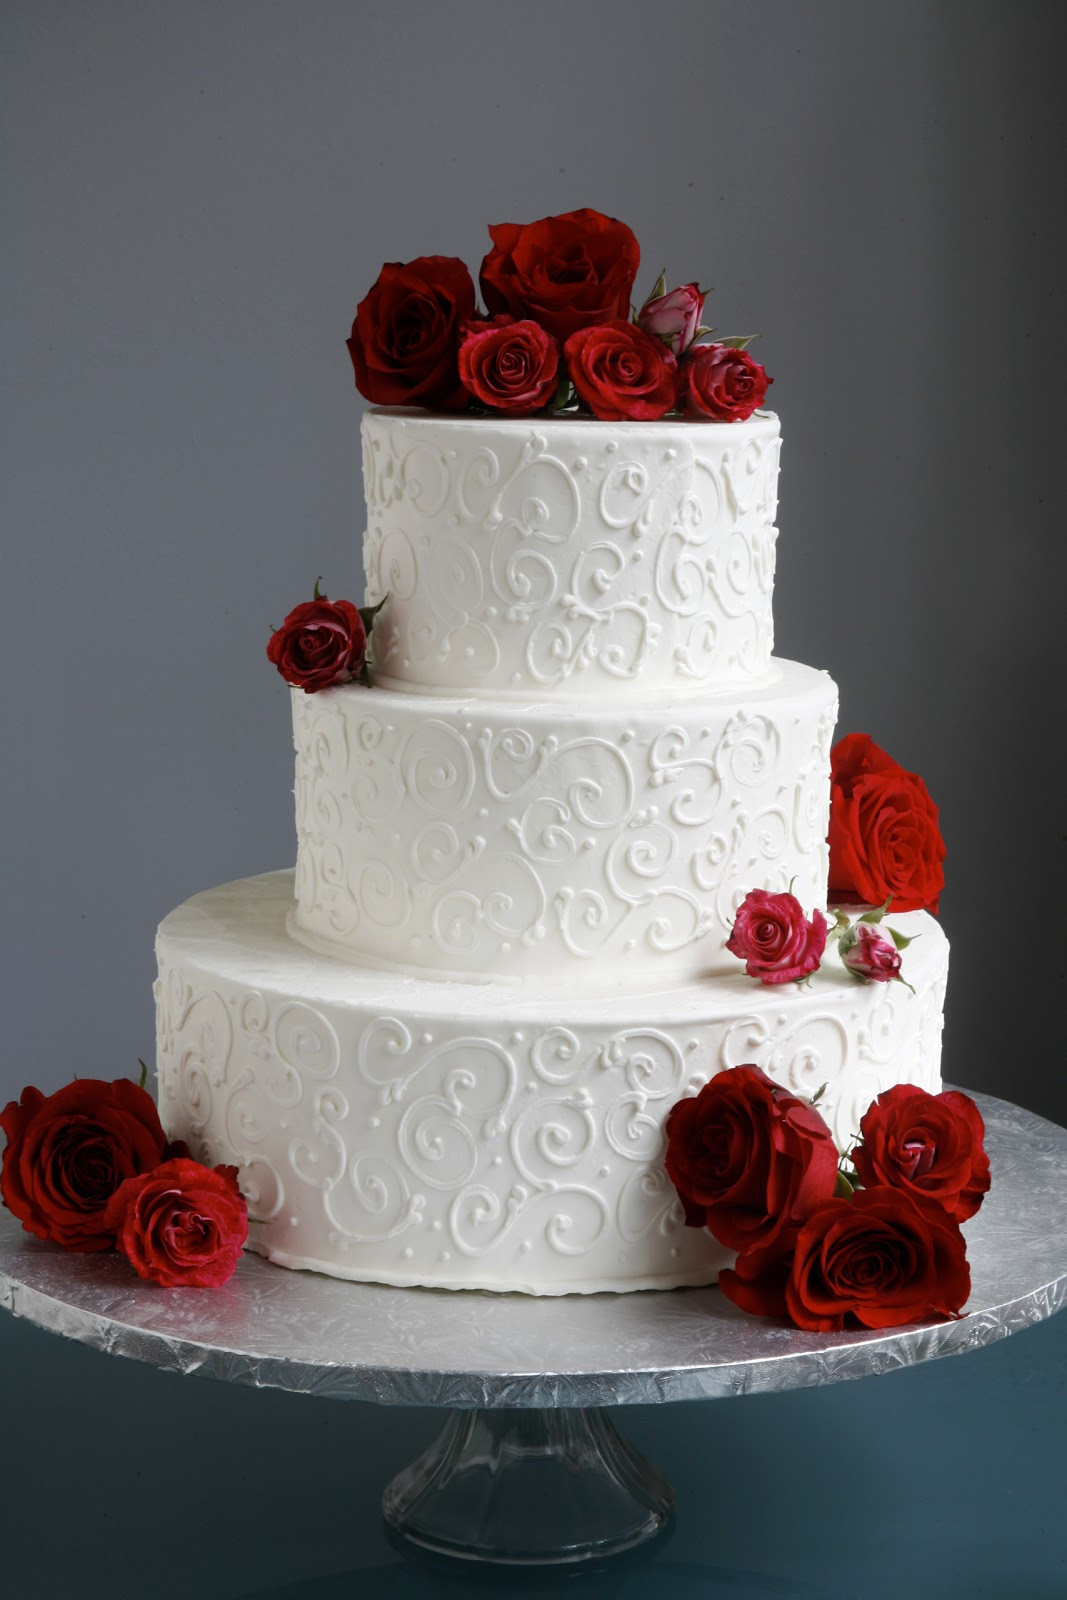 Red Roses Wedding Cakes
 A Simple Cake Wedding Cake with Fresh Flowers From